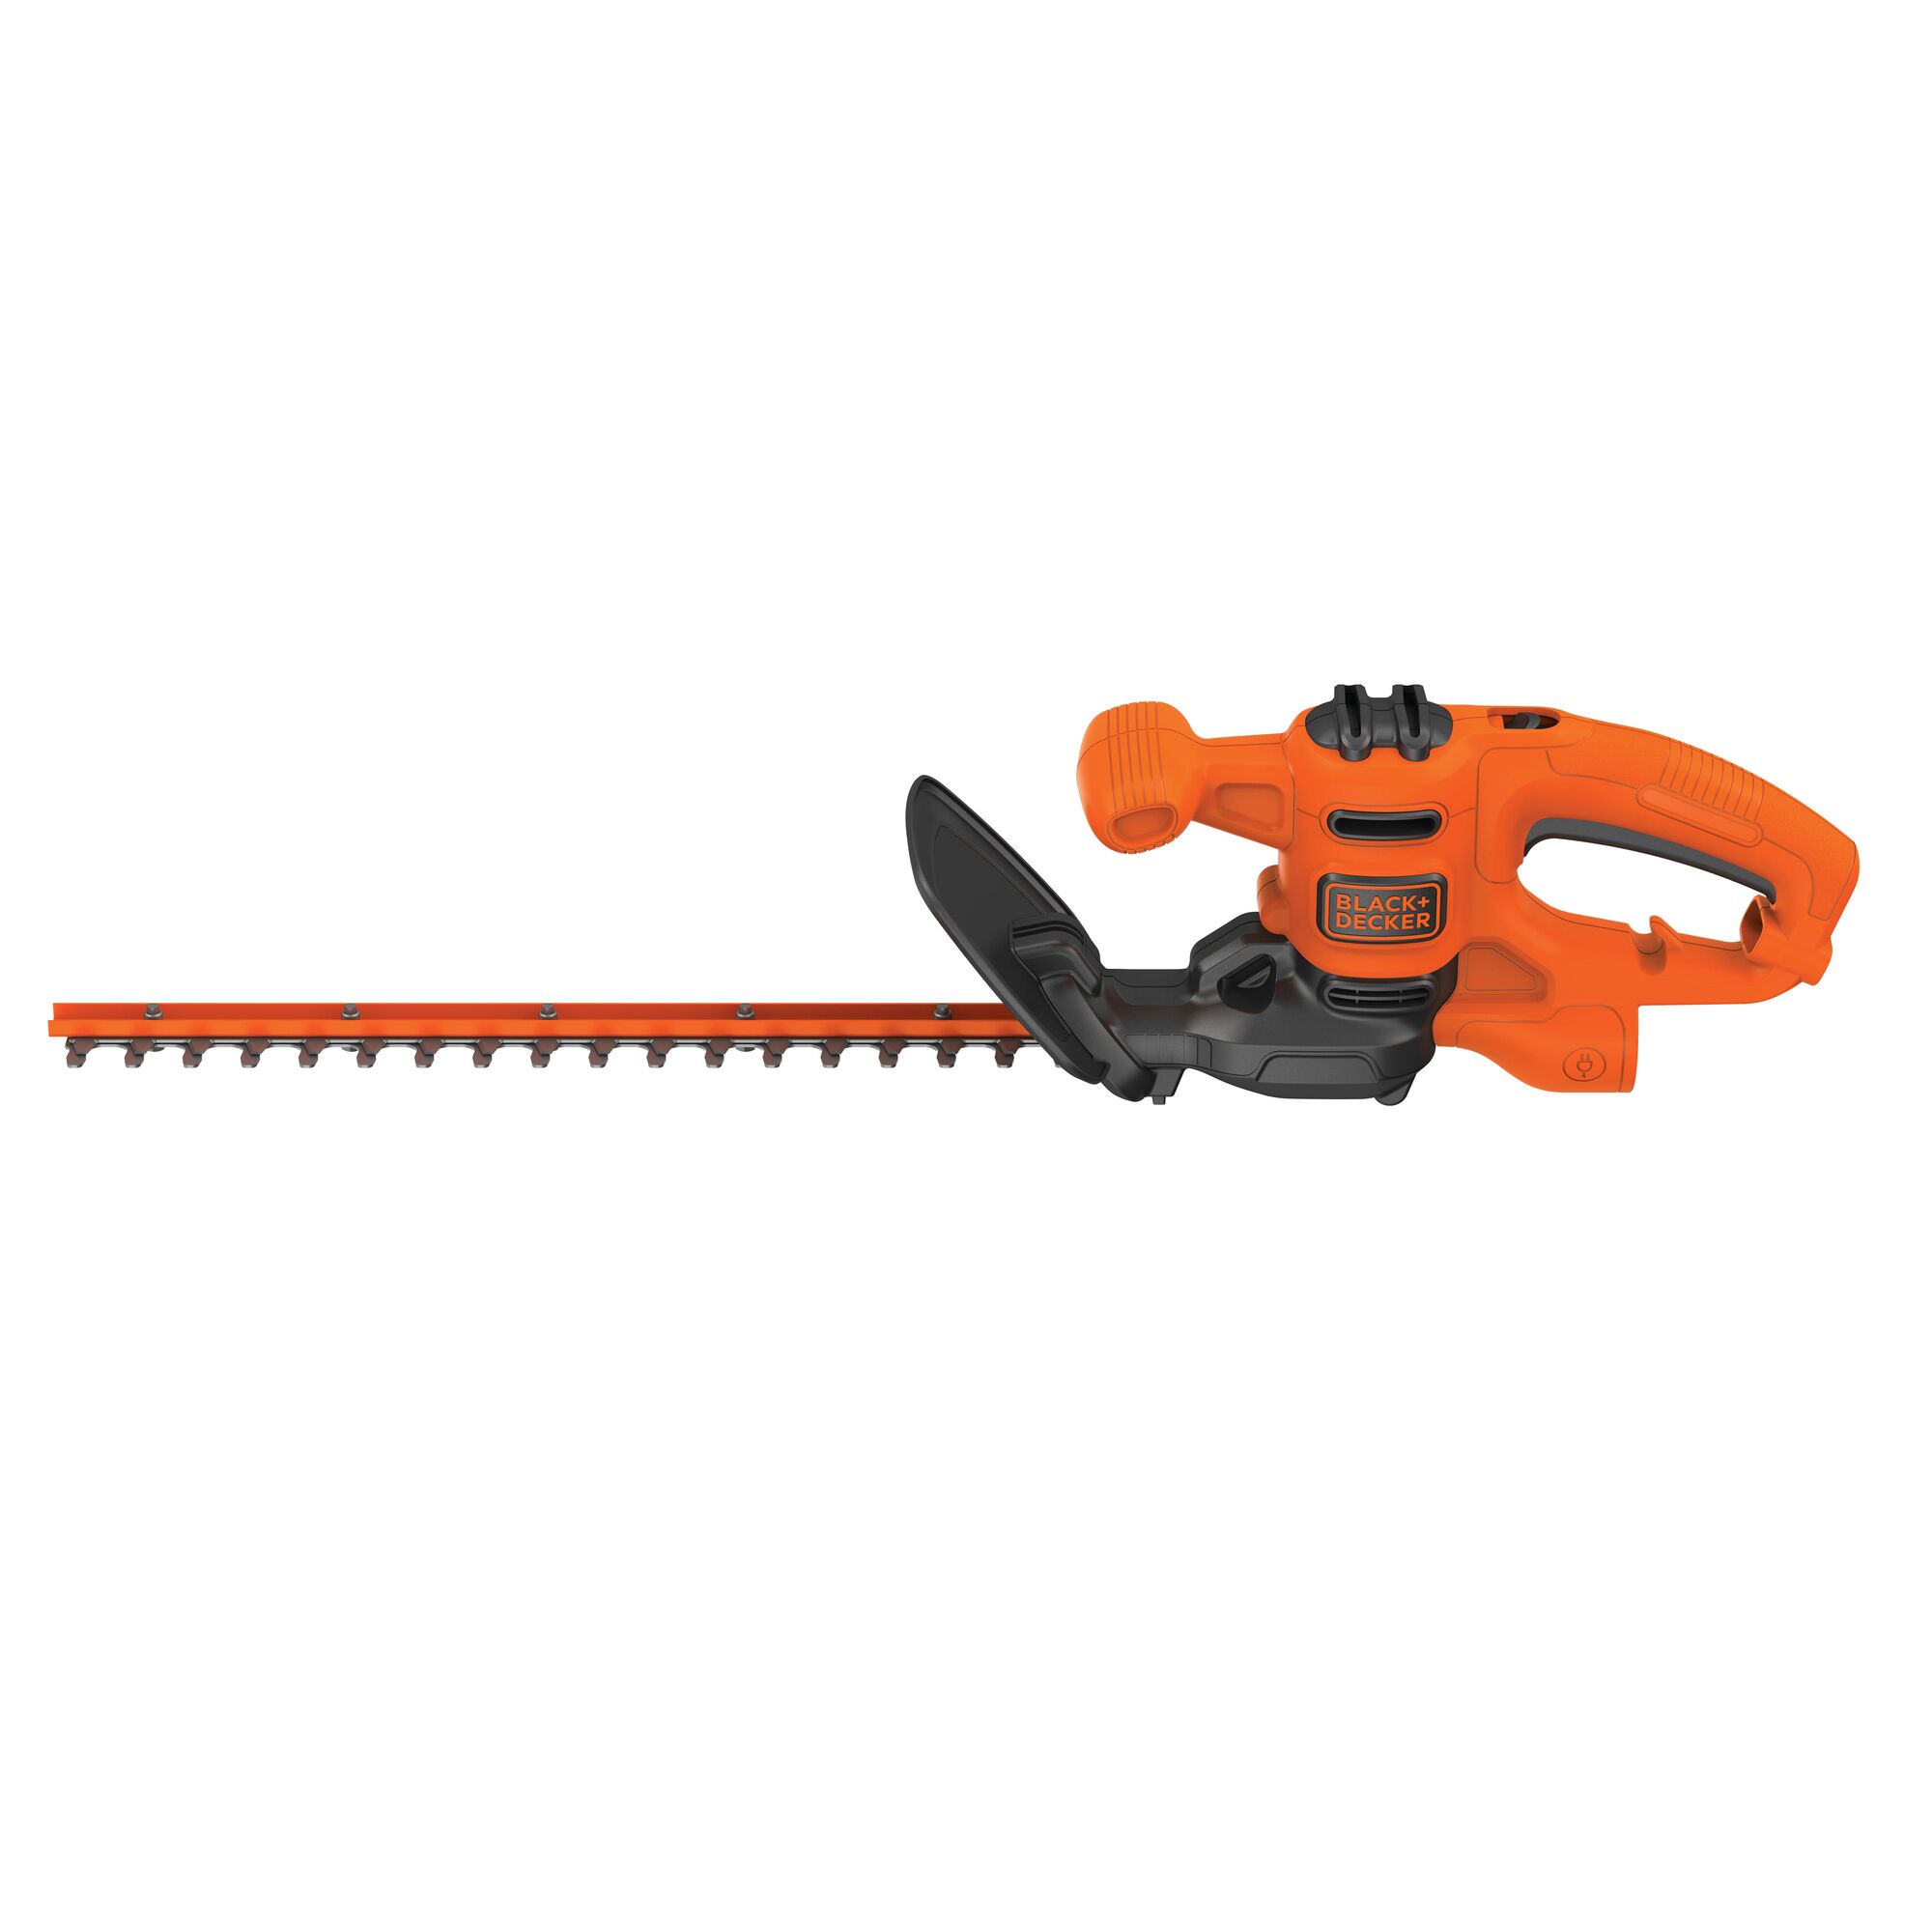 17 inch Electric Hedge Trimmer.